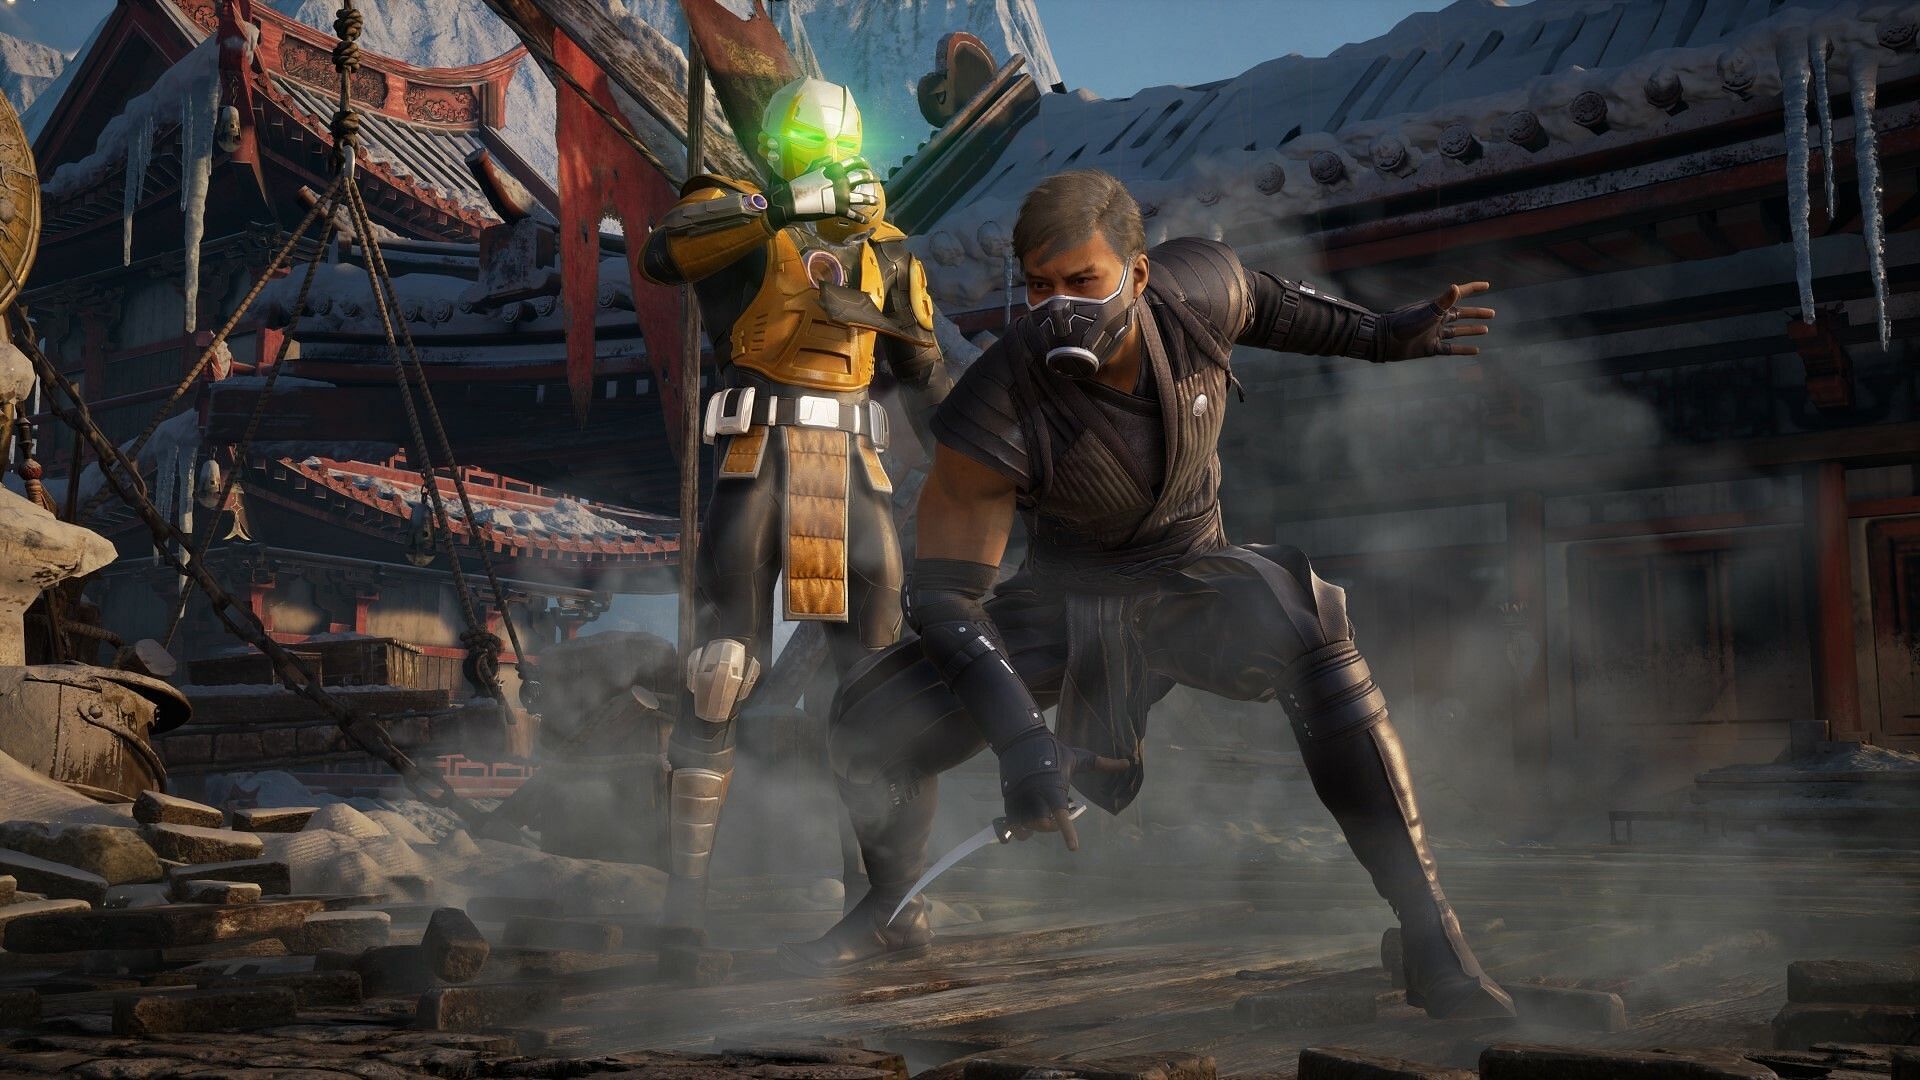 Mortal Kombat 1 countdown, release date, and start time